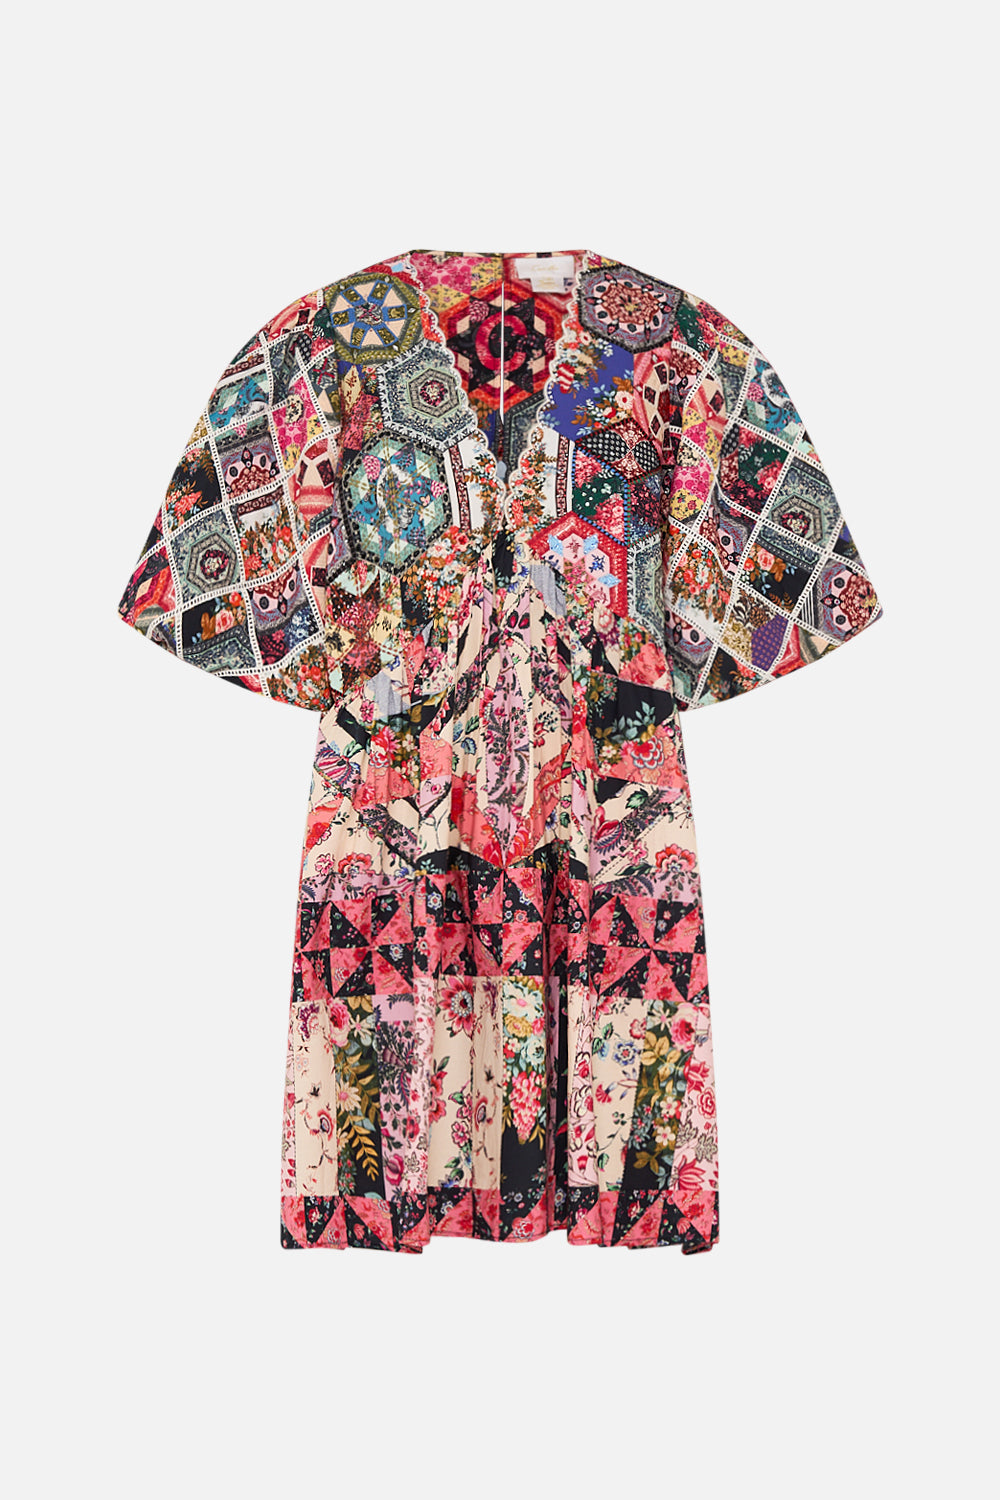 CAMILLA Patchwork Quilted Puff Sleeve Dress in Patchwork Poetry print